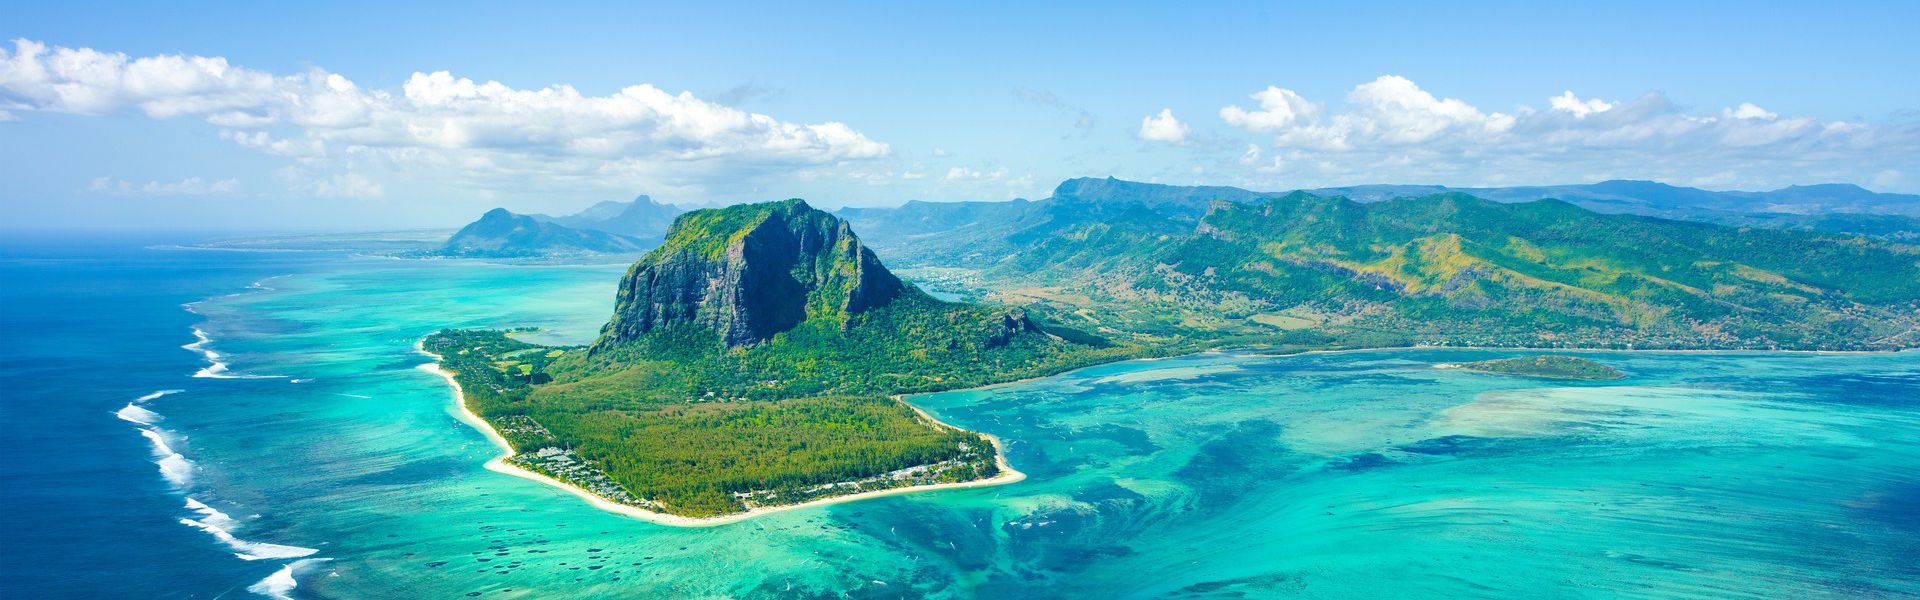 The republic of Mauritius comprises of several islands located in the south-east of the Indian Ocean. The main island is 2,000 kilometers away from the eastern coast of Africa. Foreigners thoroughly enjoy its beaches and sea as well as its culture. Mauritians are welcoming and different cultures coexist peacefully here. While the island has evolved and kept up with the needs of modern times, it has not let go of its roots.